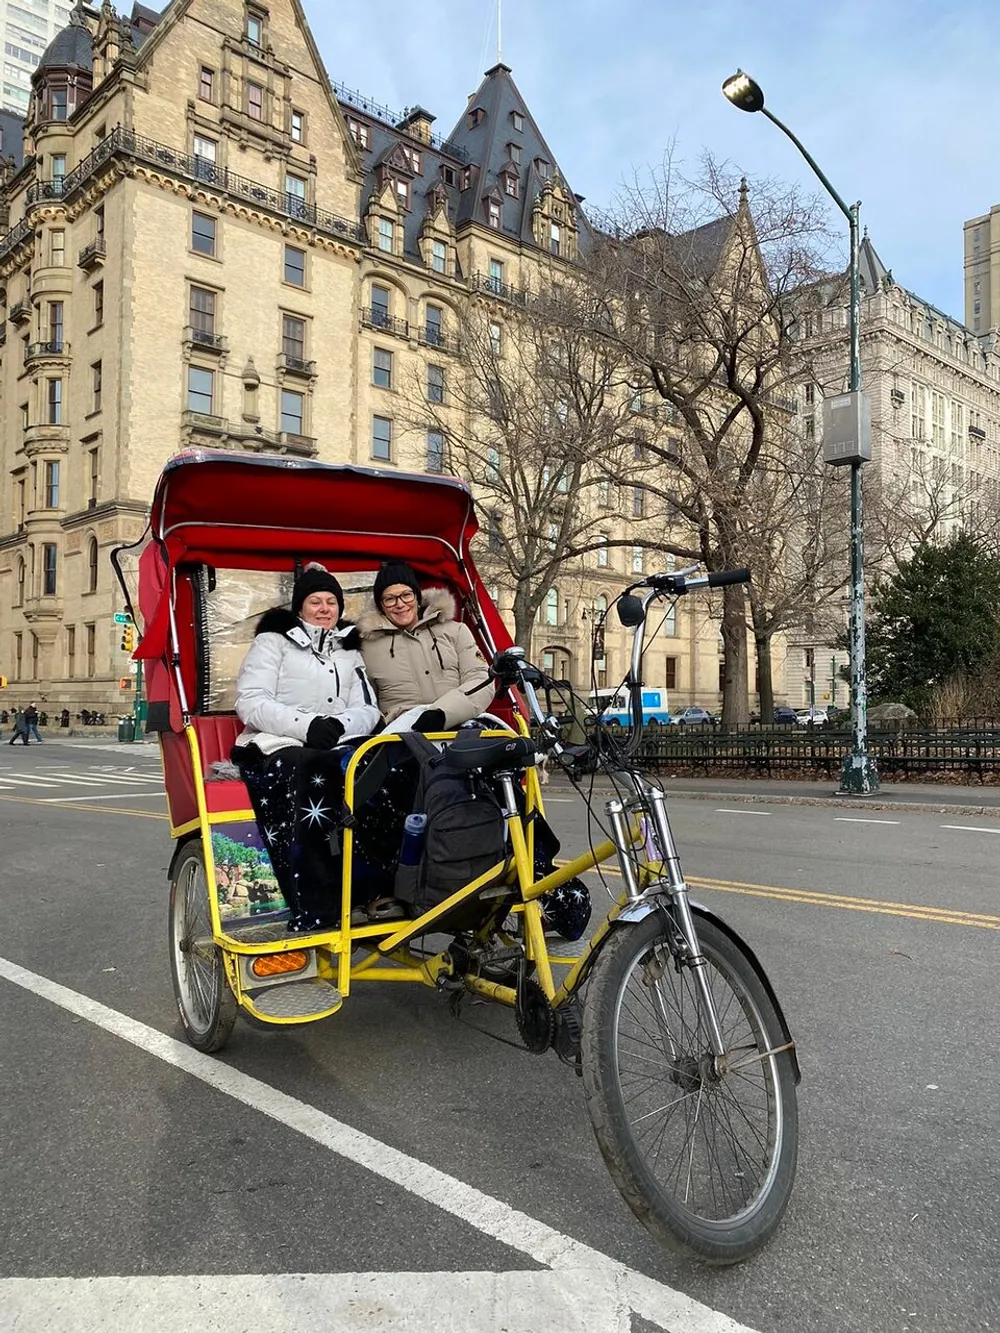 Two individuals are smiling for a photo while seated in a red and yellow pedicab in front of a historic building with leafless trees and a streetlamp in the background